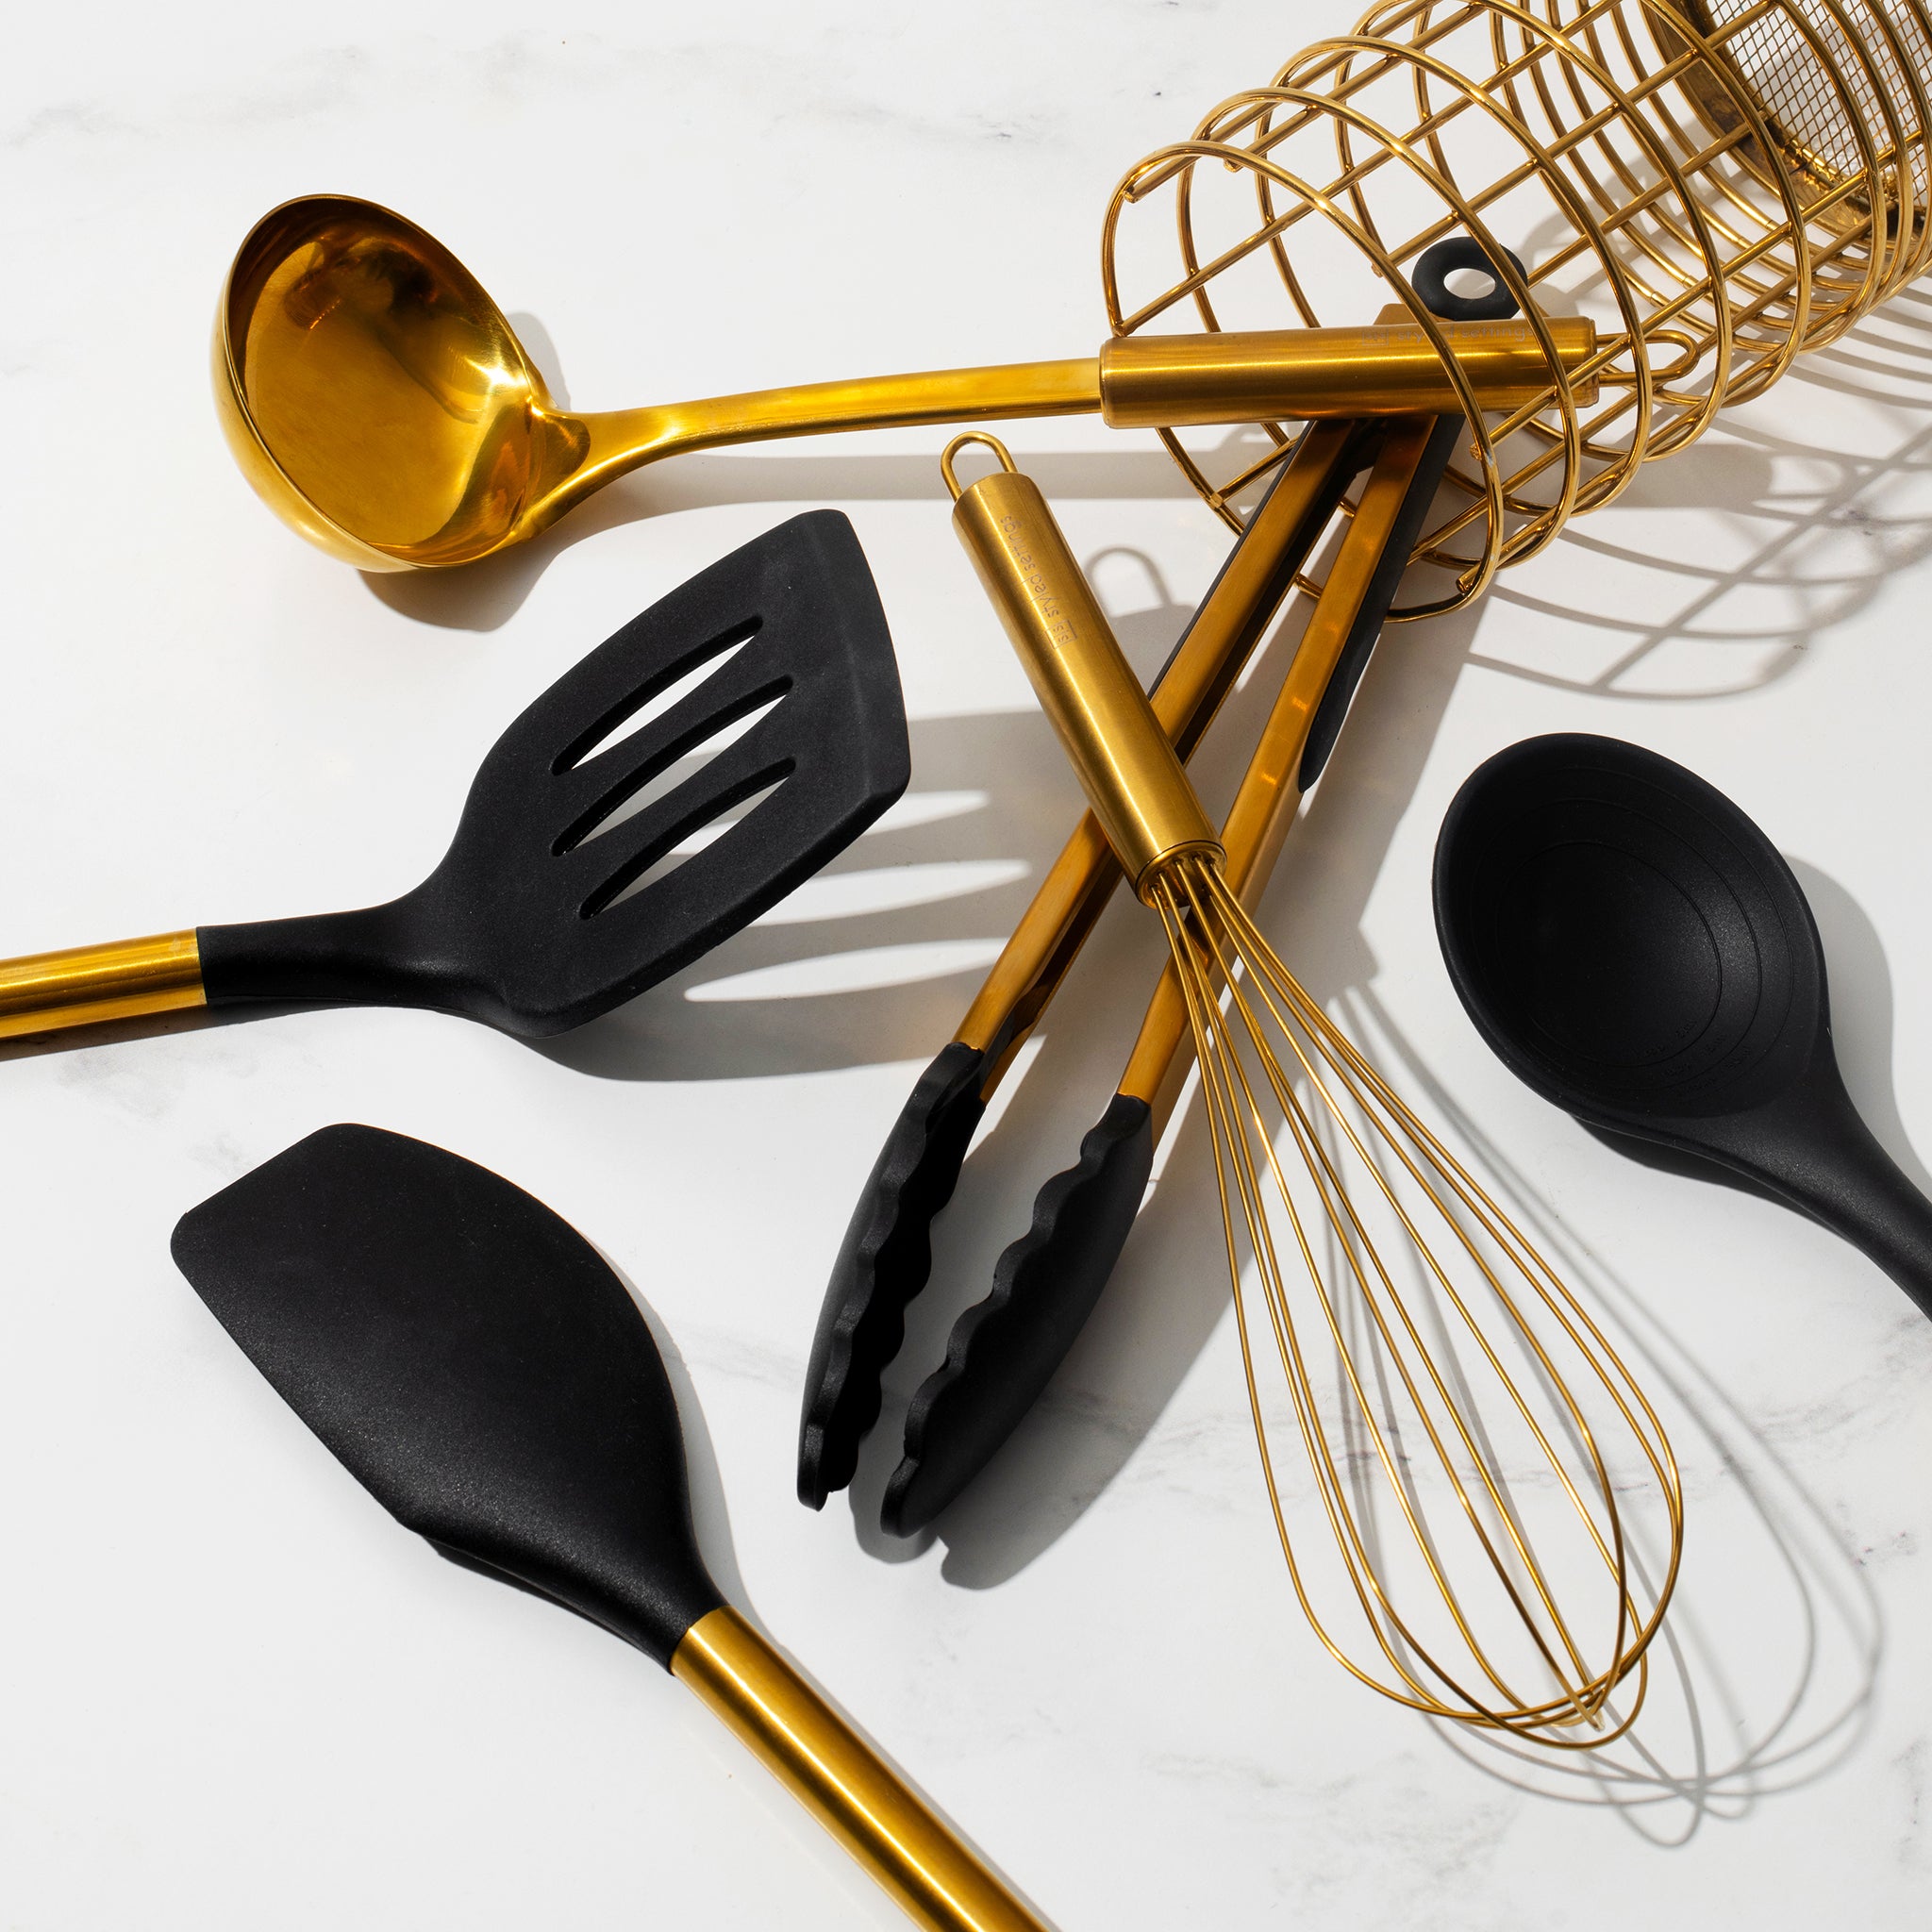 Styled Settings Black and Gold Kitchen Utensils with Stainless Steel Gold Utensil Holder -18 PC Black and Gold Cooking Utensils Set Includes